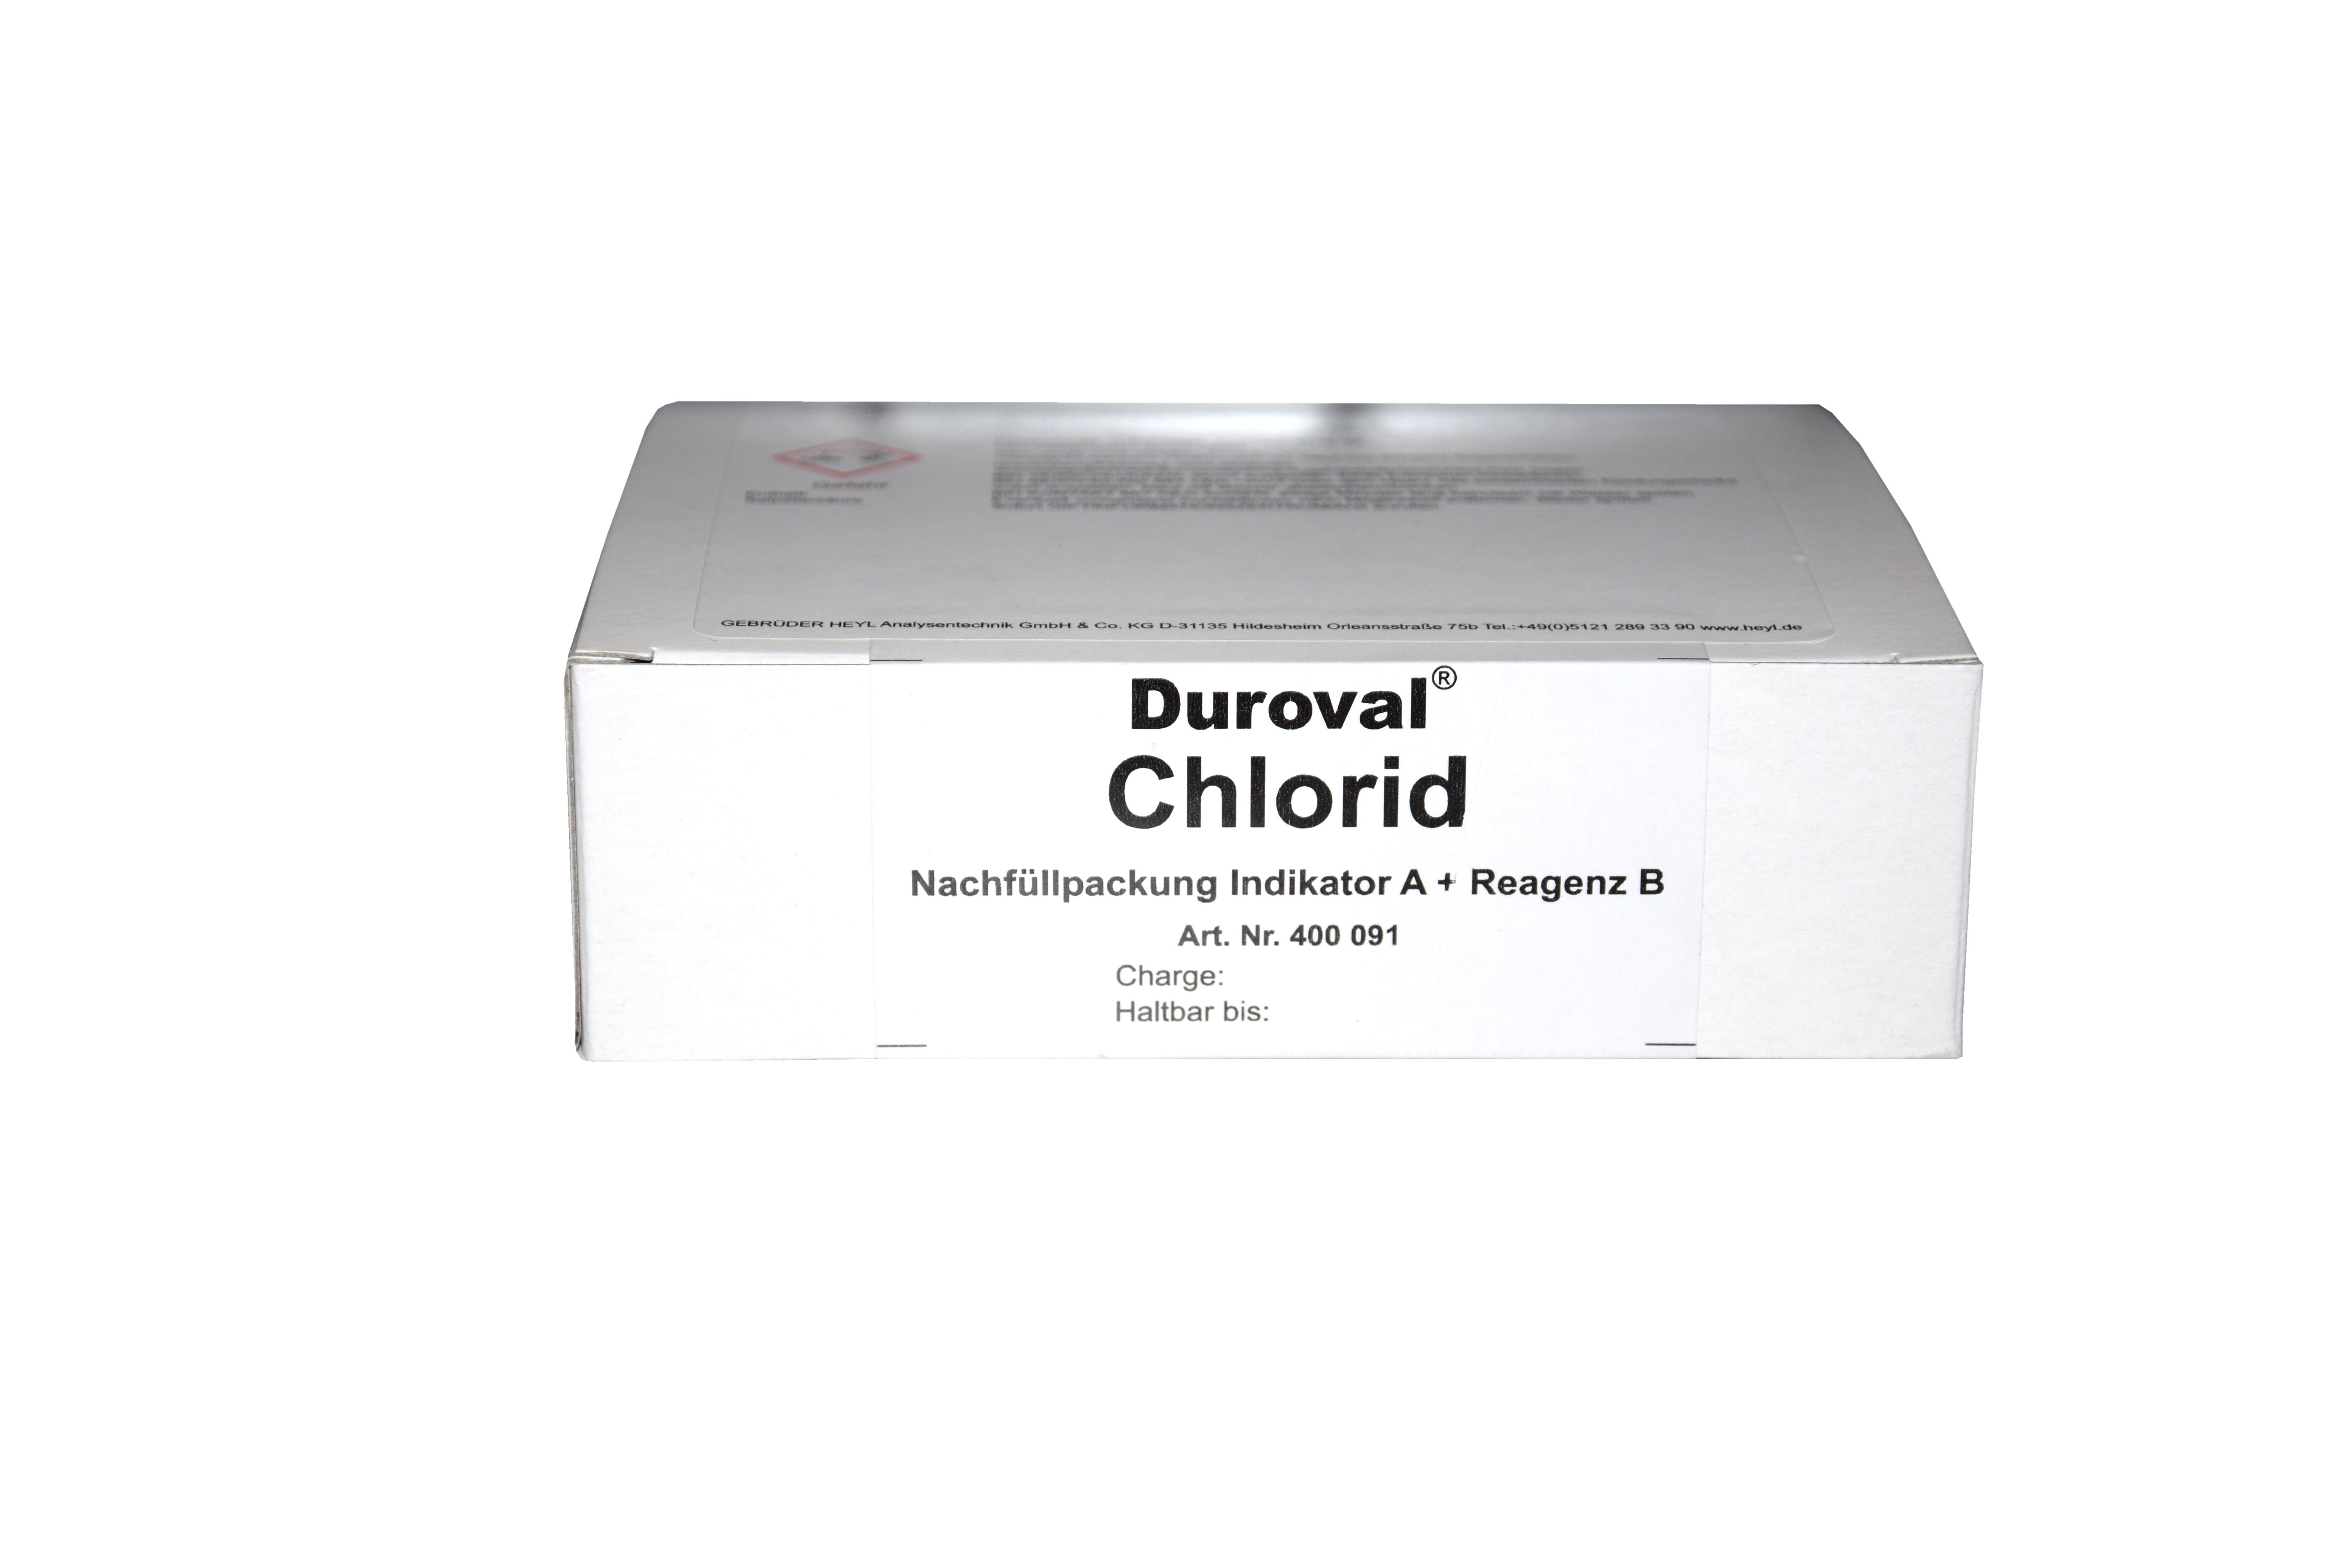 DUROVAL® Chloride reagents A+B refill pack